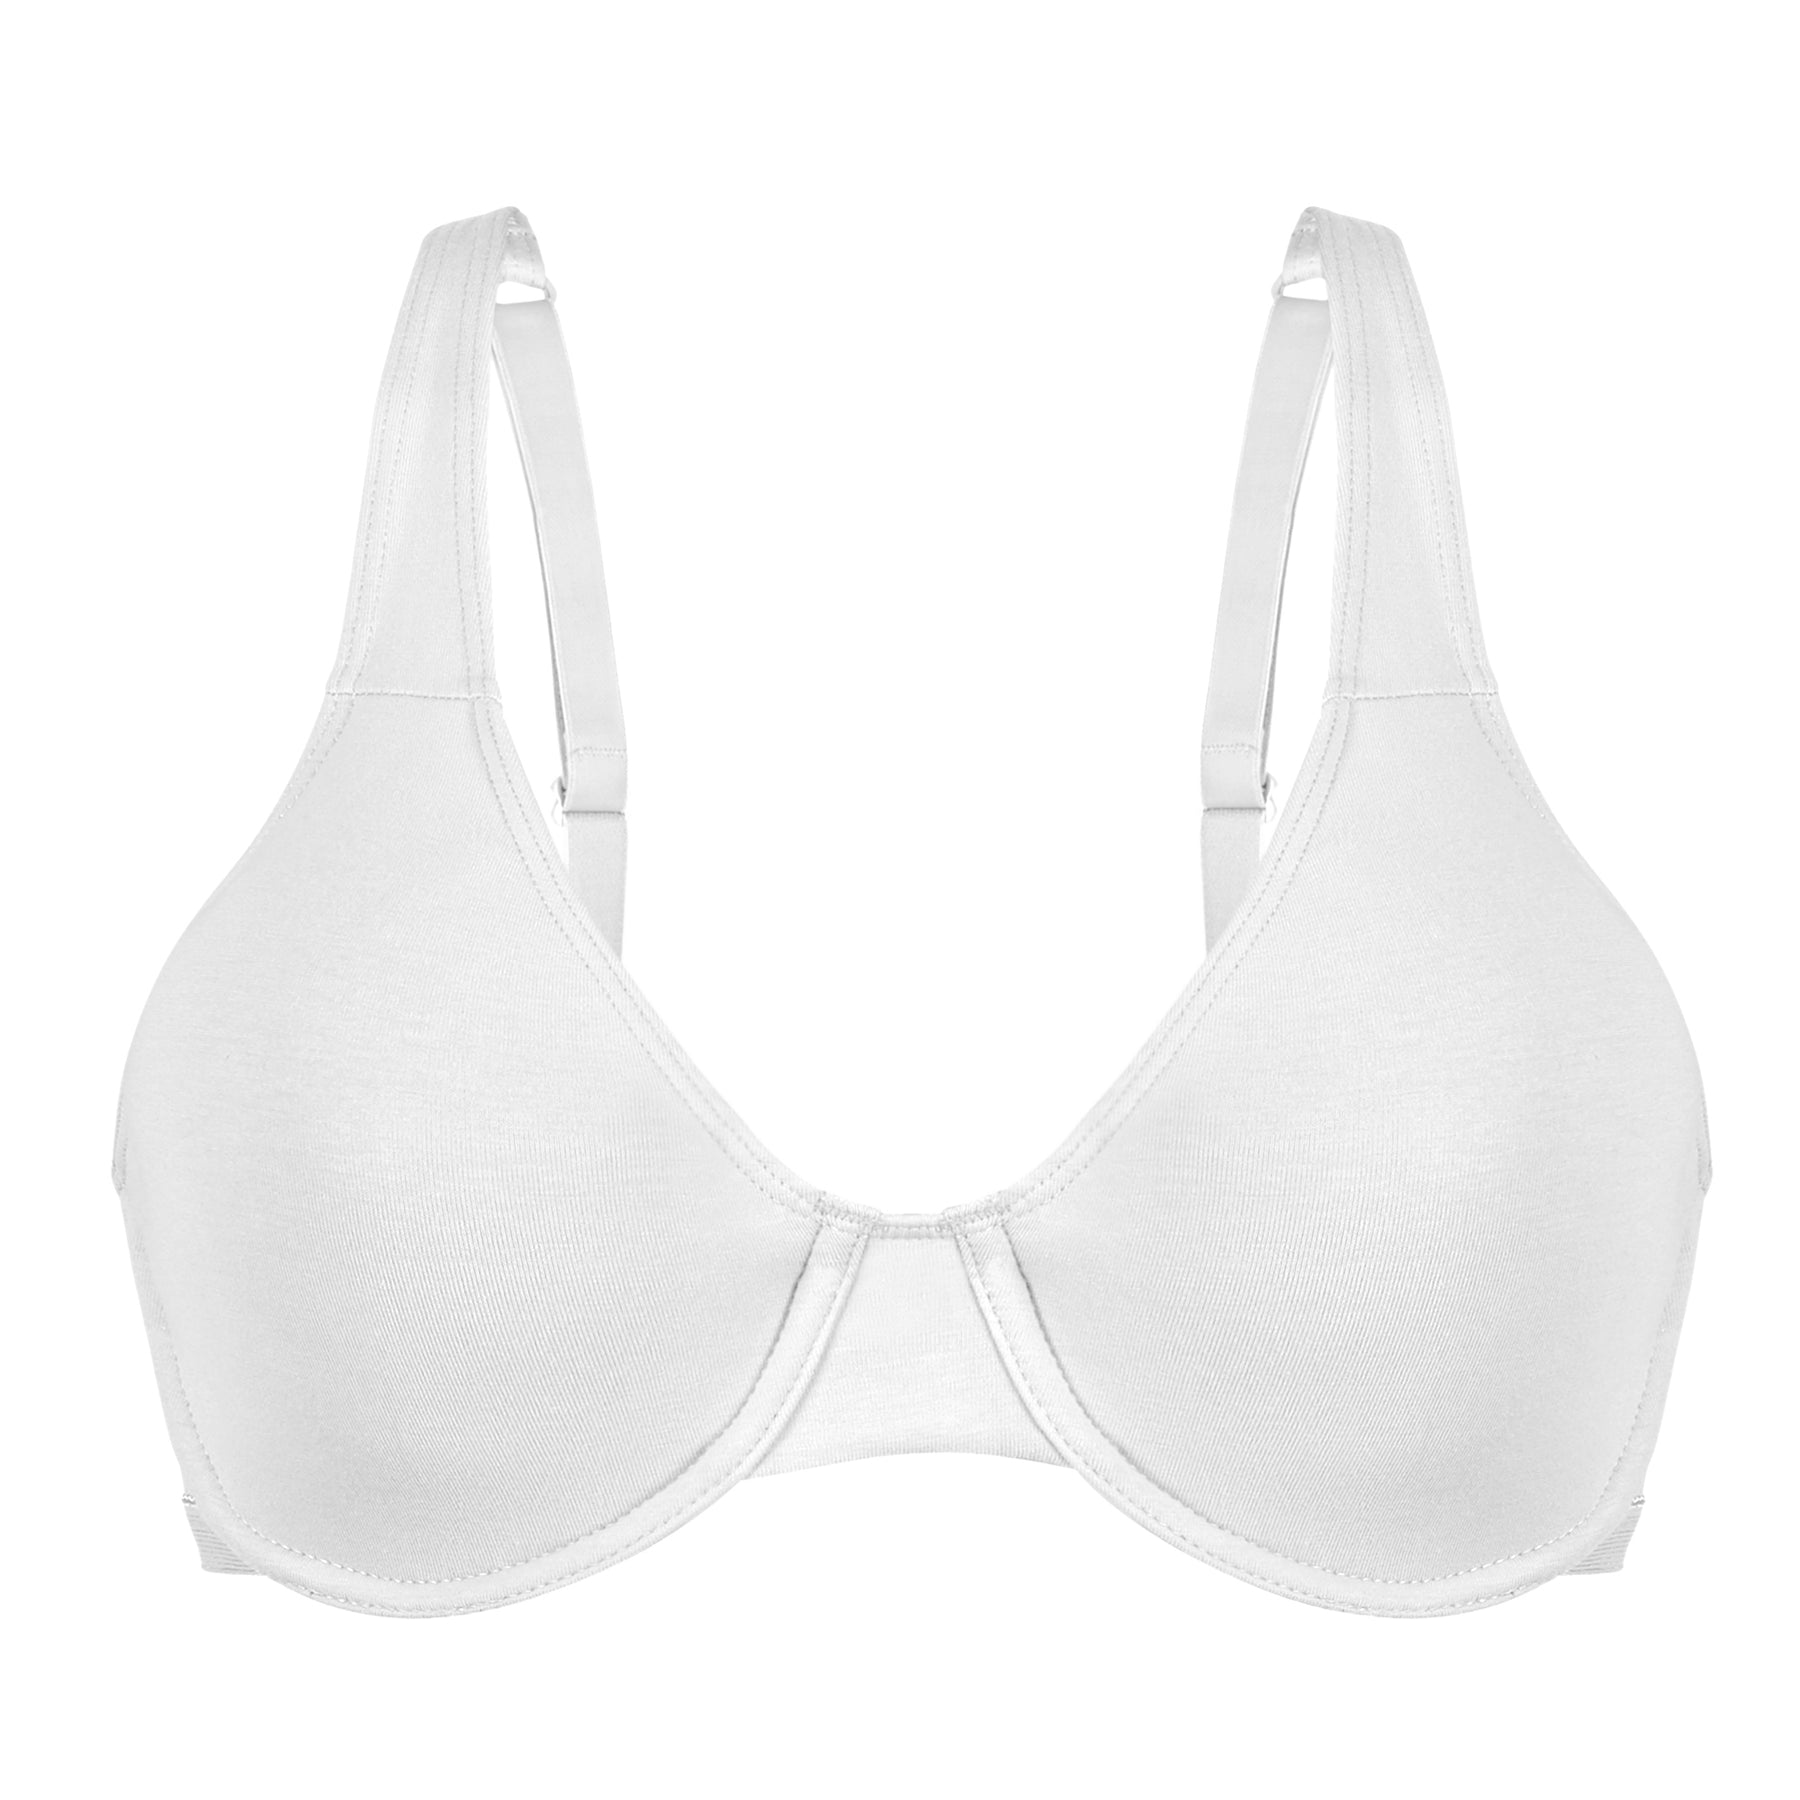 Reccomendations?] Does it exist: Cotton/natural fiber supportive bras  available in 44H UK/44K US (Similar to Cacique t-shirt)? : r/ABraThatFits